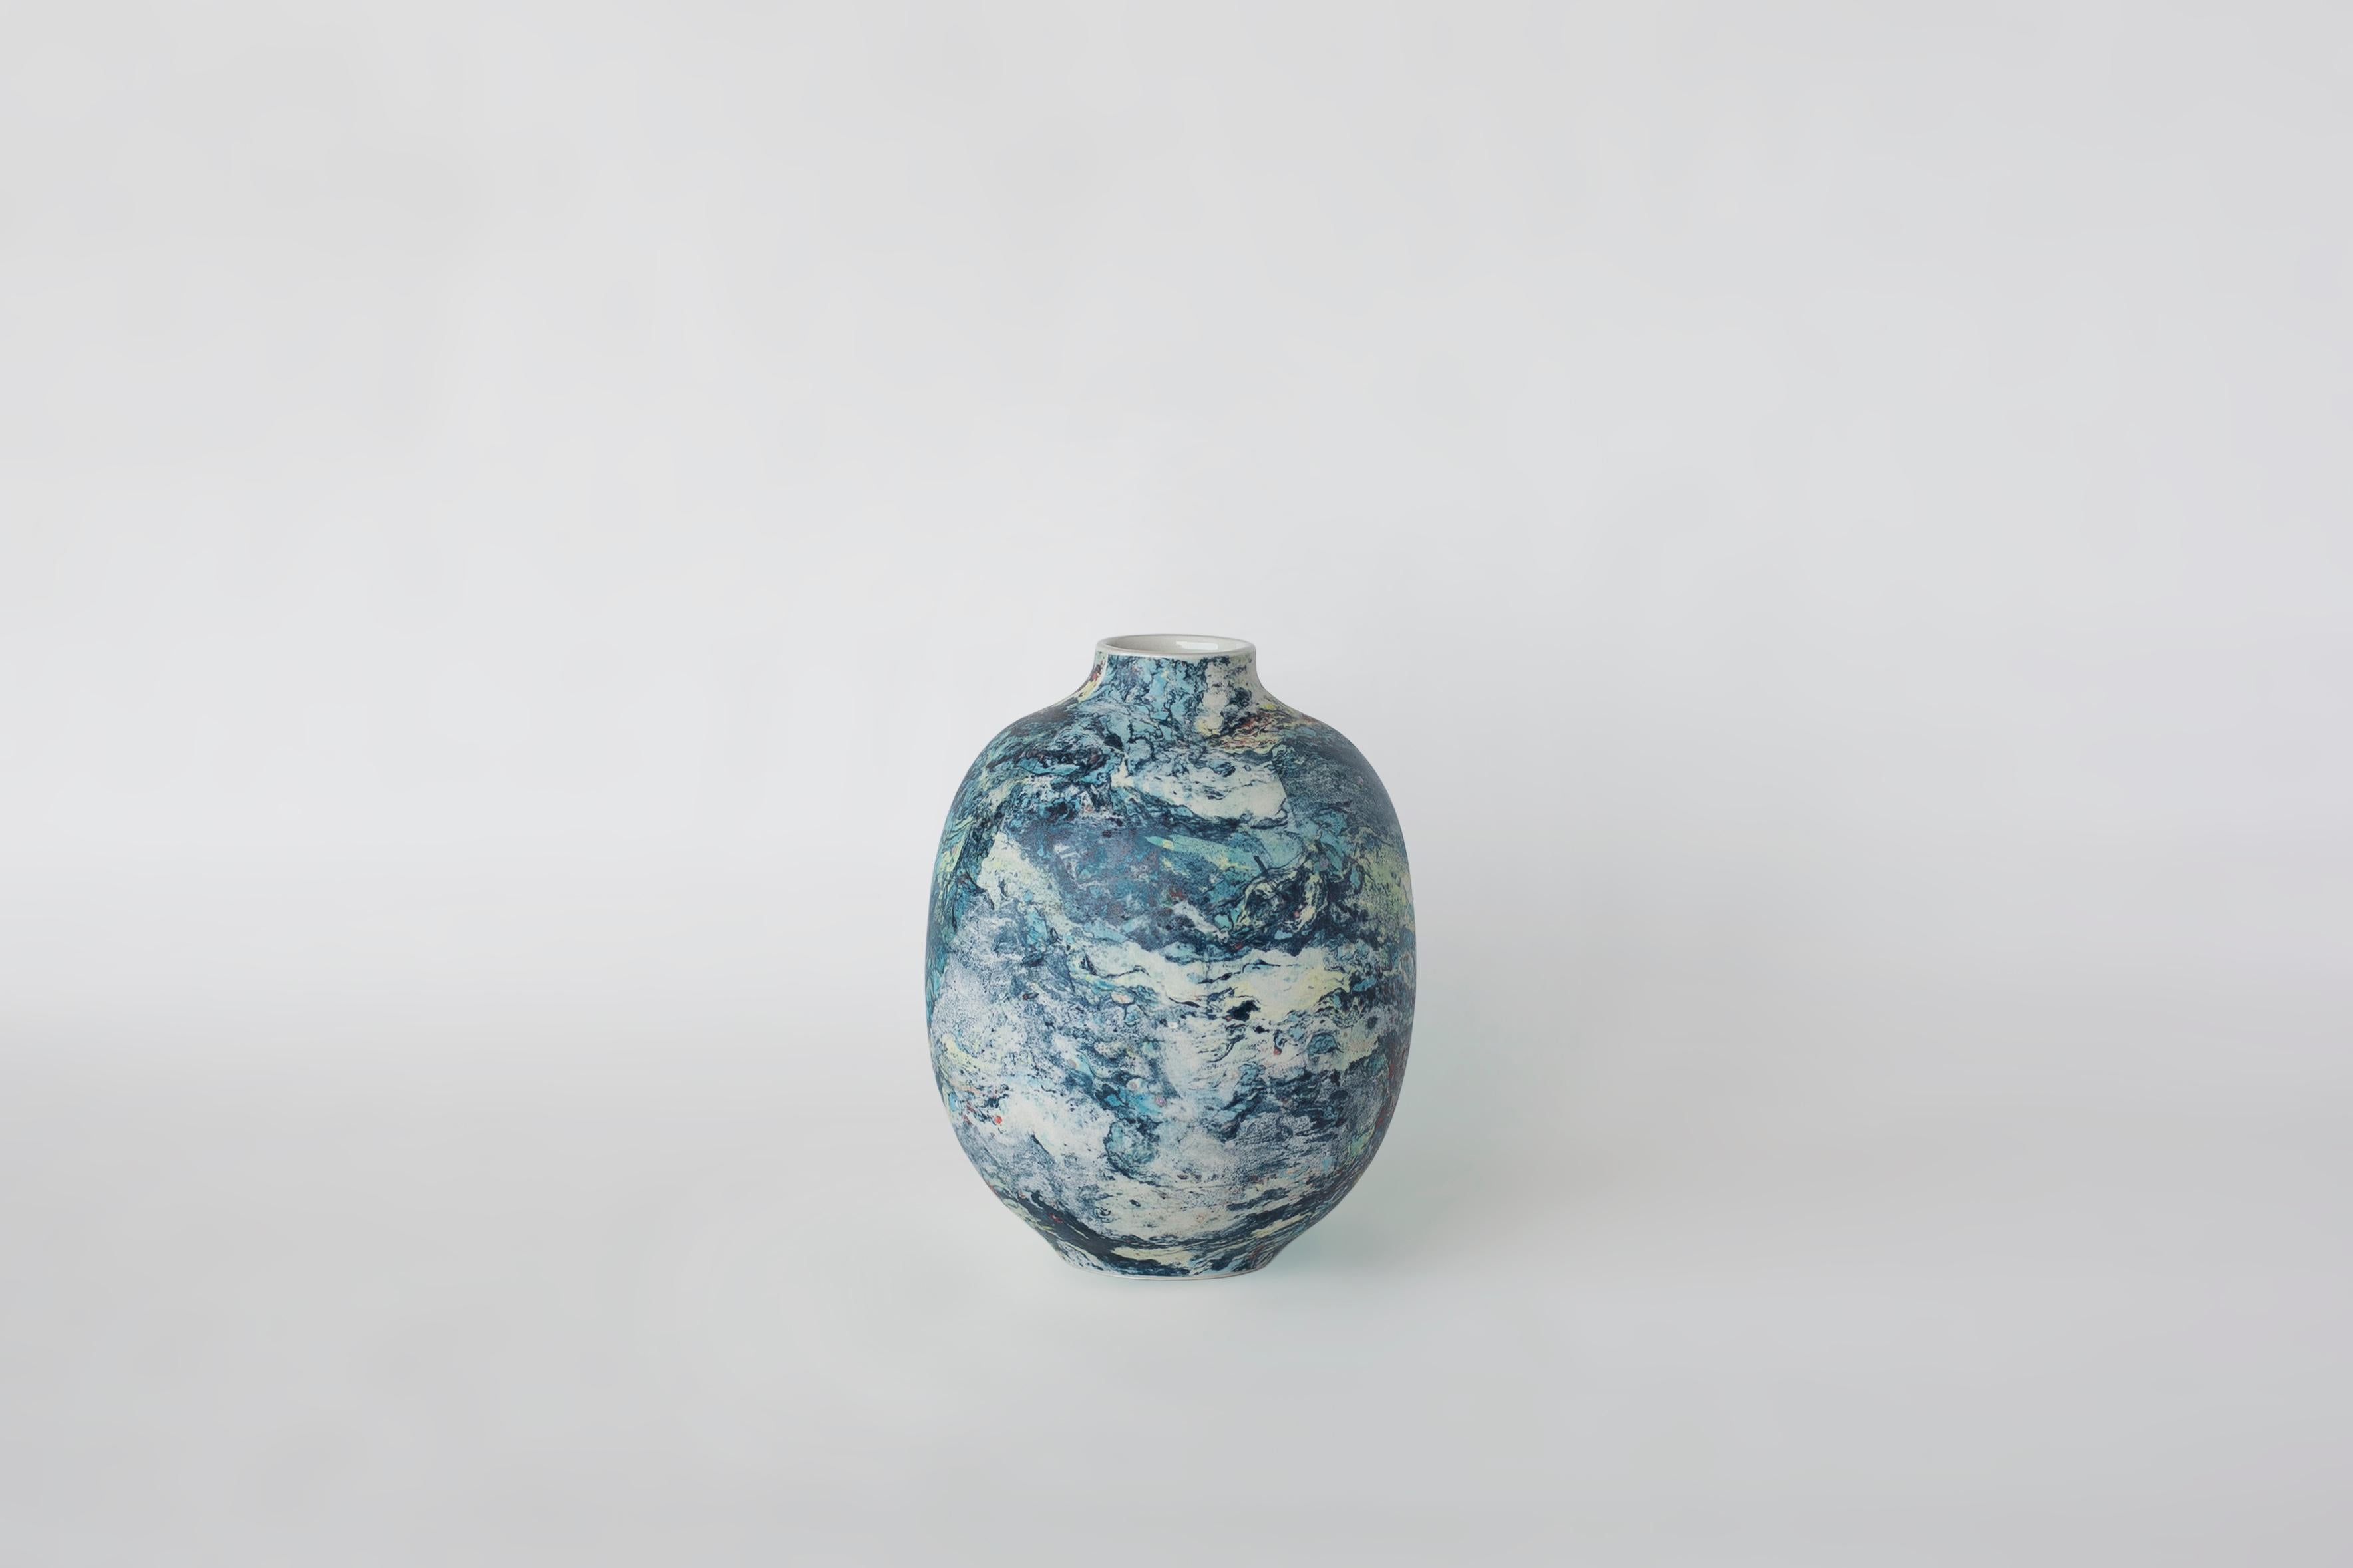 Small marble vase by Veronika Švábeníková.
Dimensions: 14 × 14 × 17.5 cm.
Materials: ceramic.

A petit version of a truly unique collection of ceramic vases that will enhance any decor.

The way she makes them is truly unique. She takes common